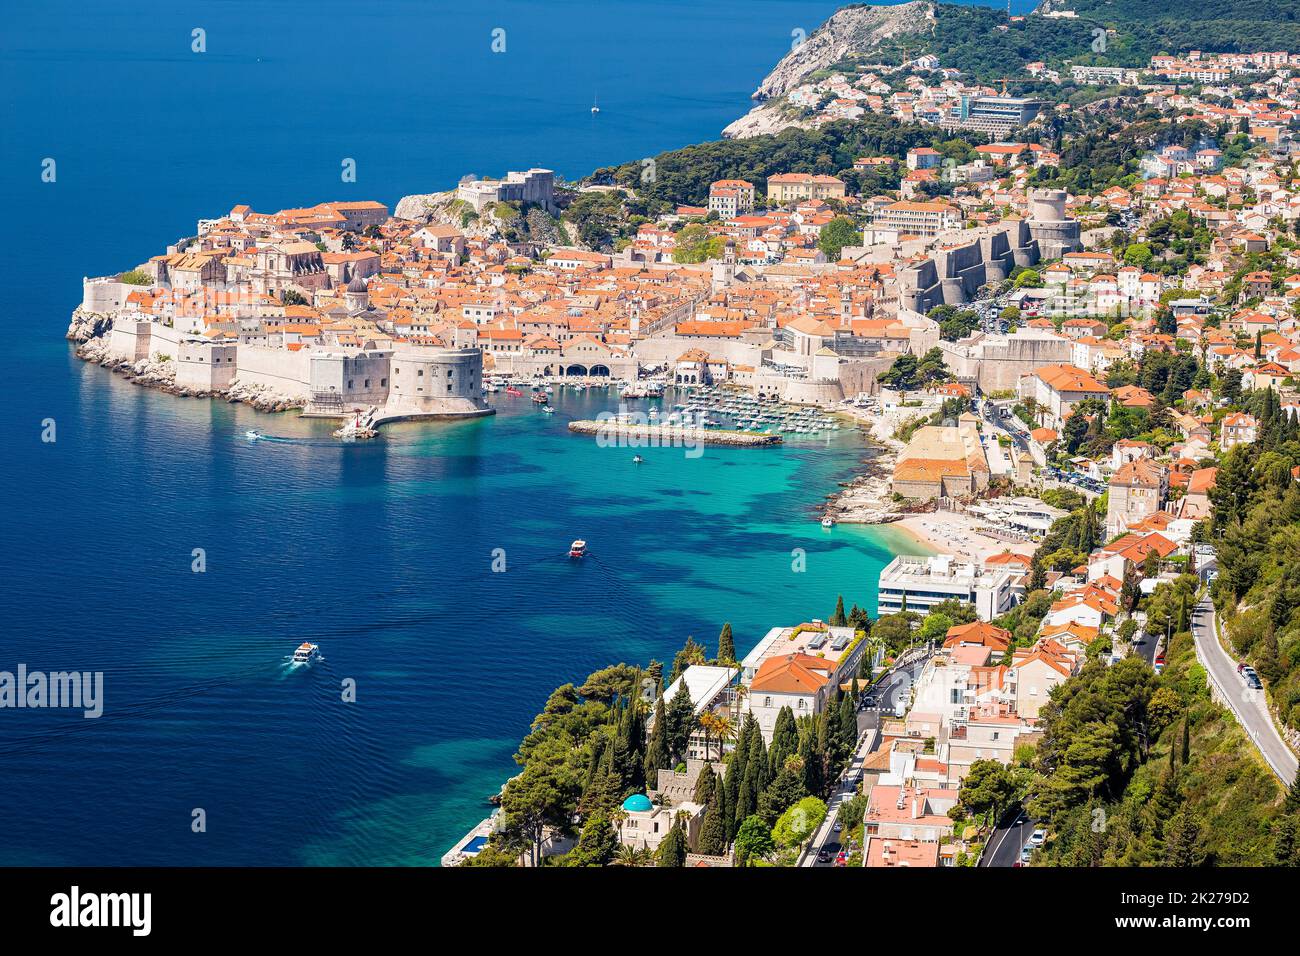 Dubrovnik. The most famous tourist destination in Croatia panoramic view Stock Photo